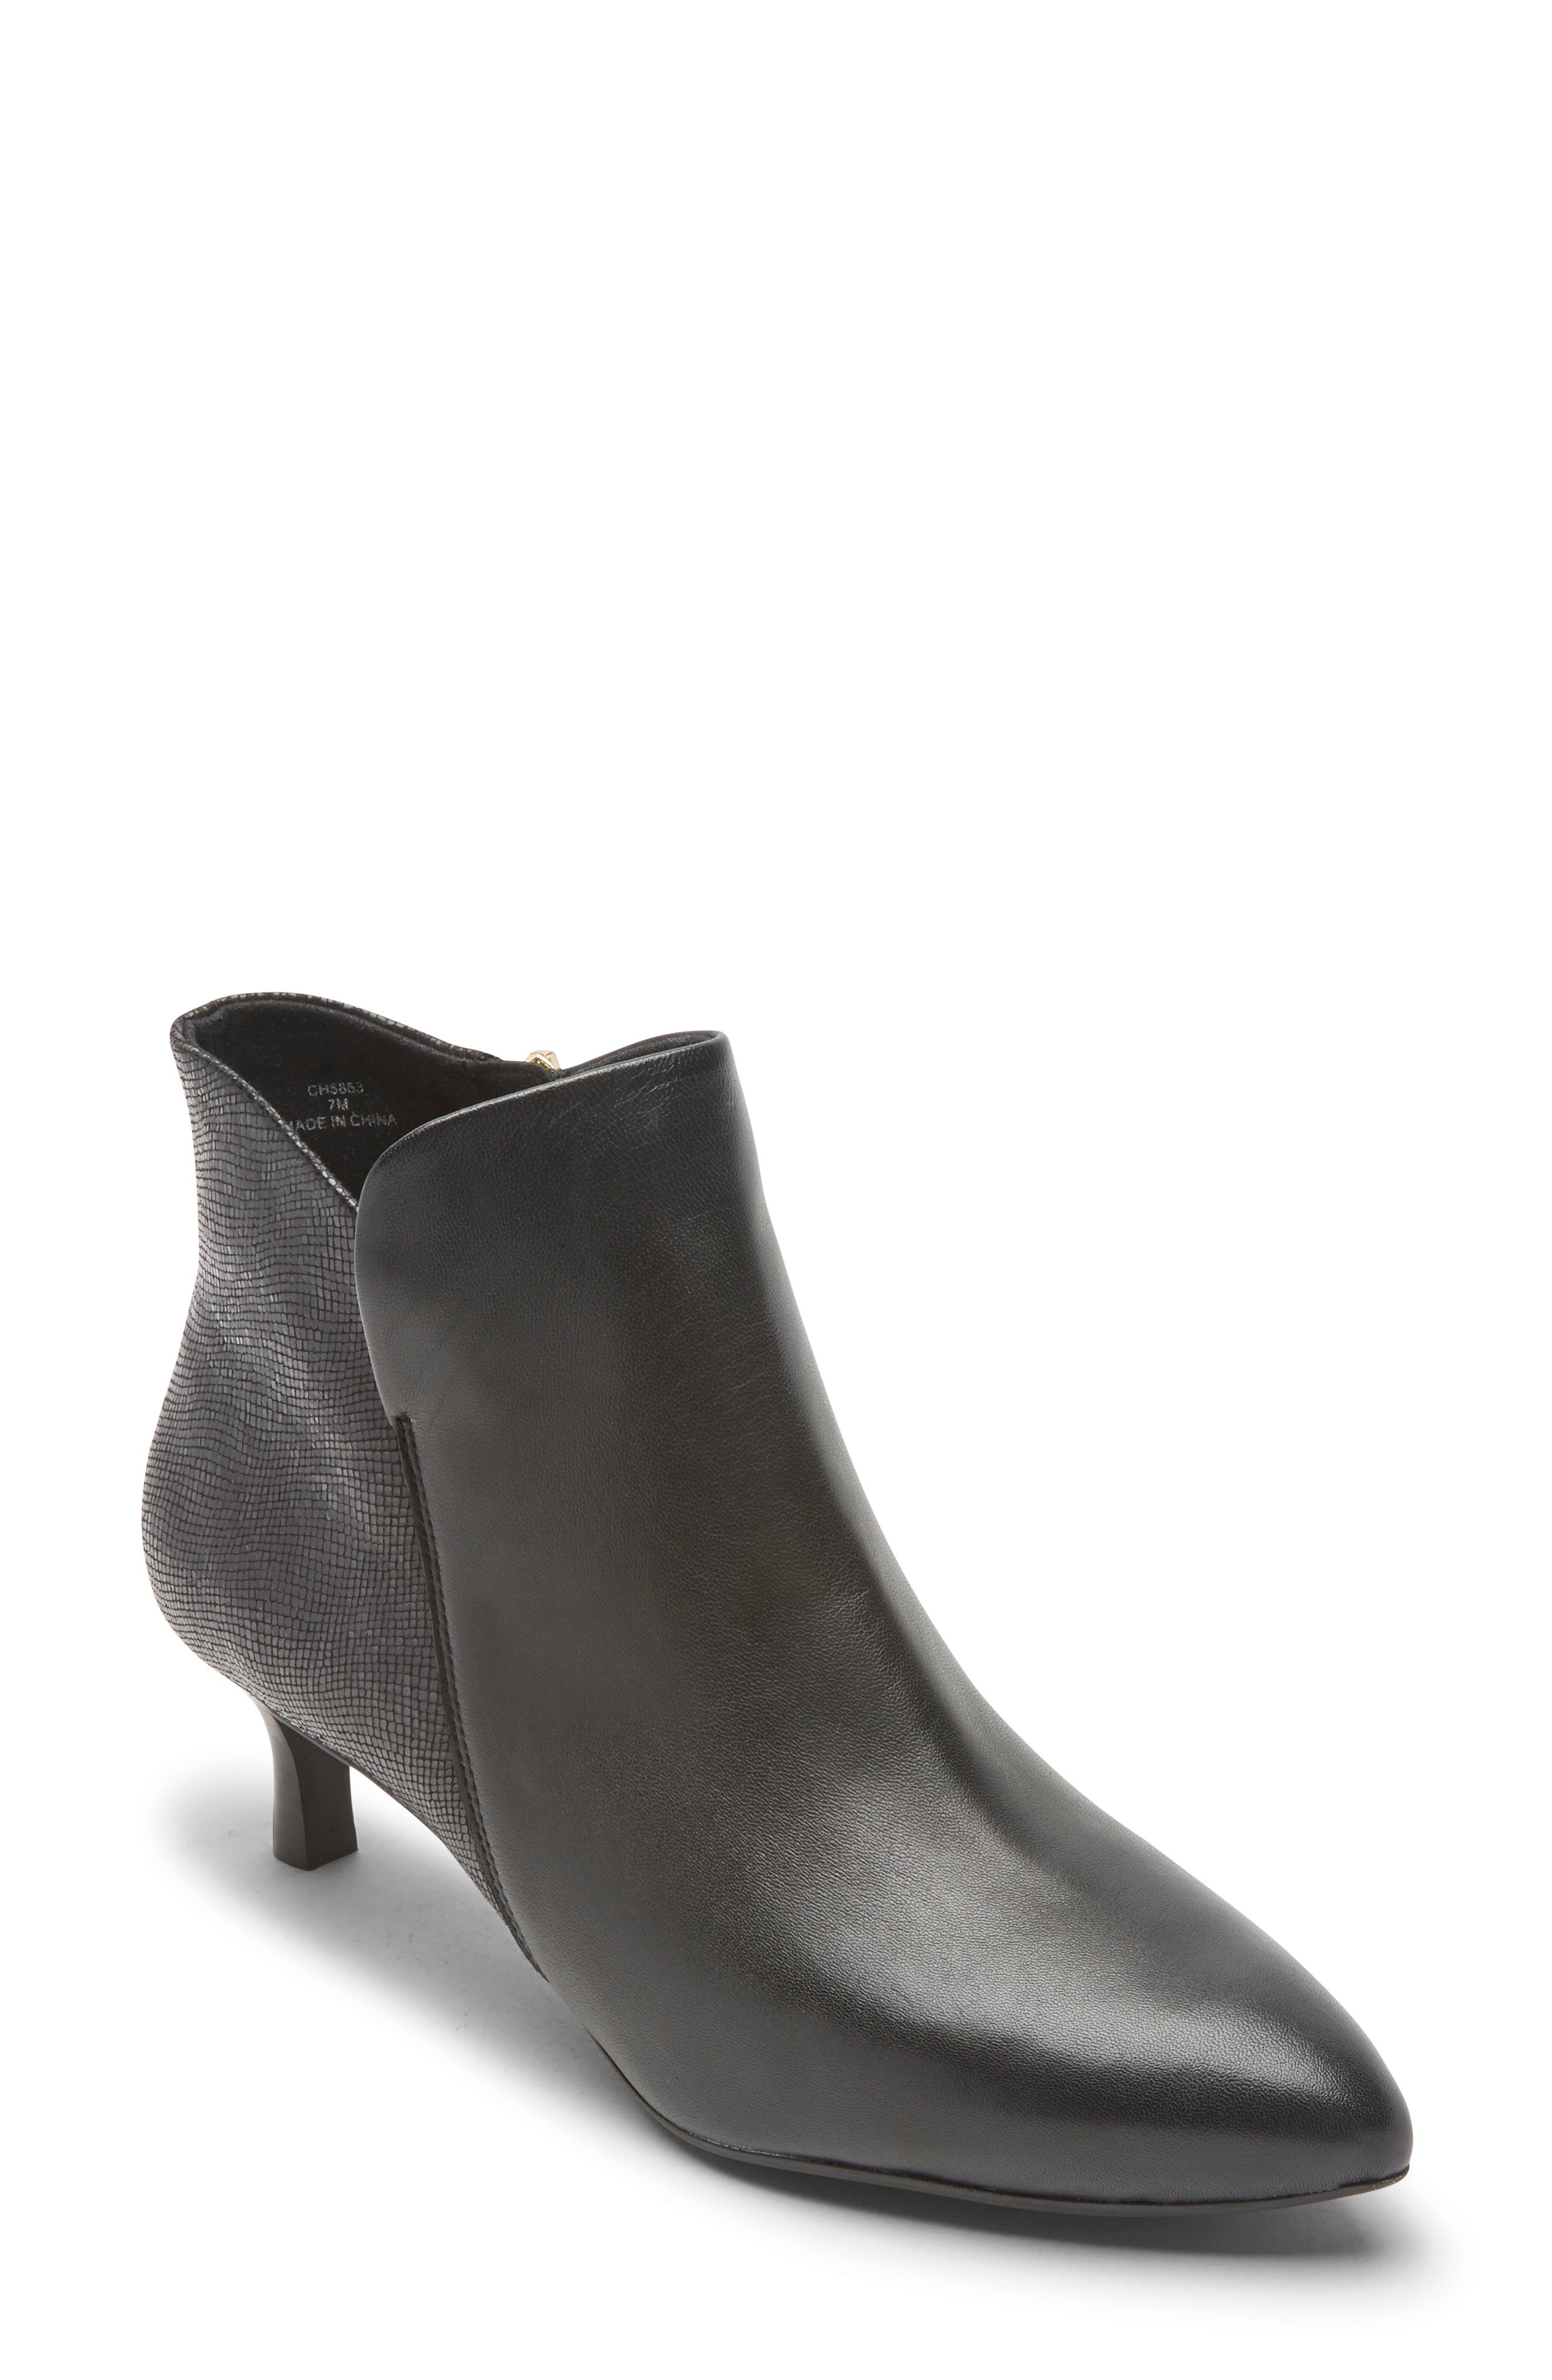 rockport total motion booties